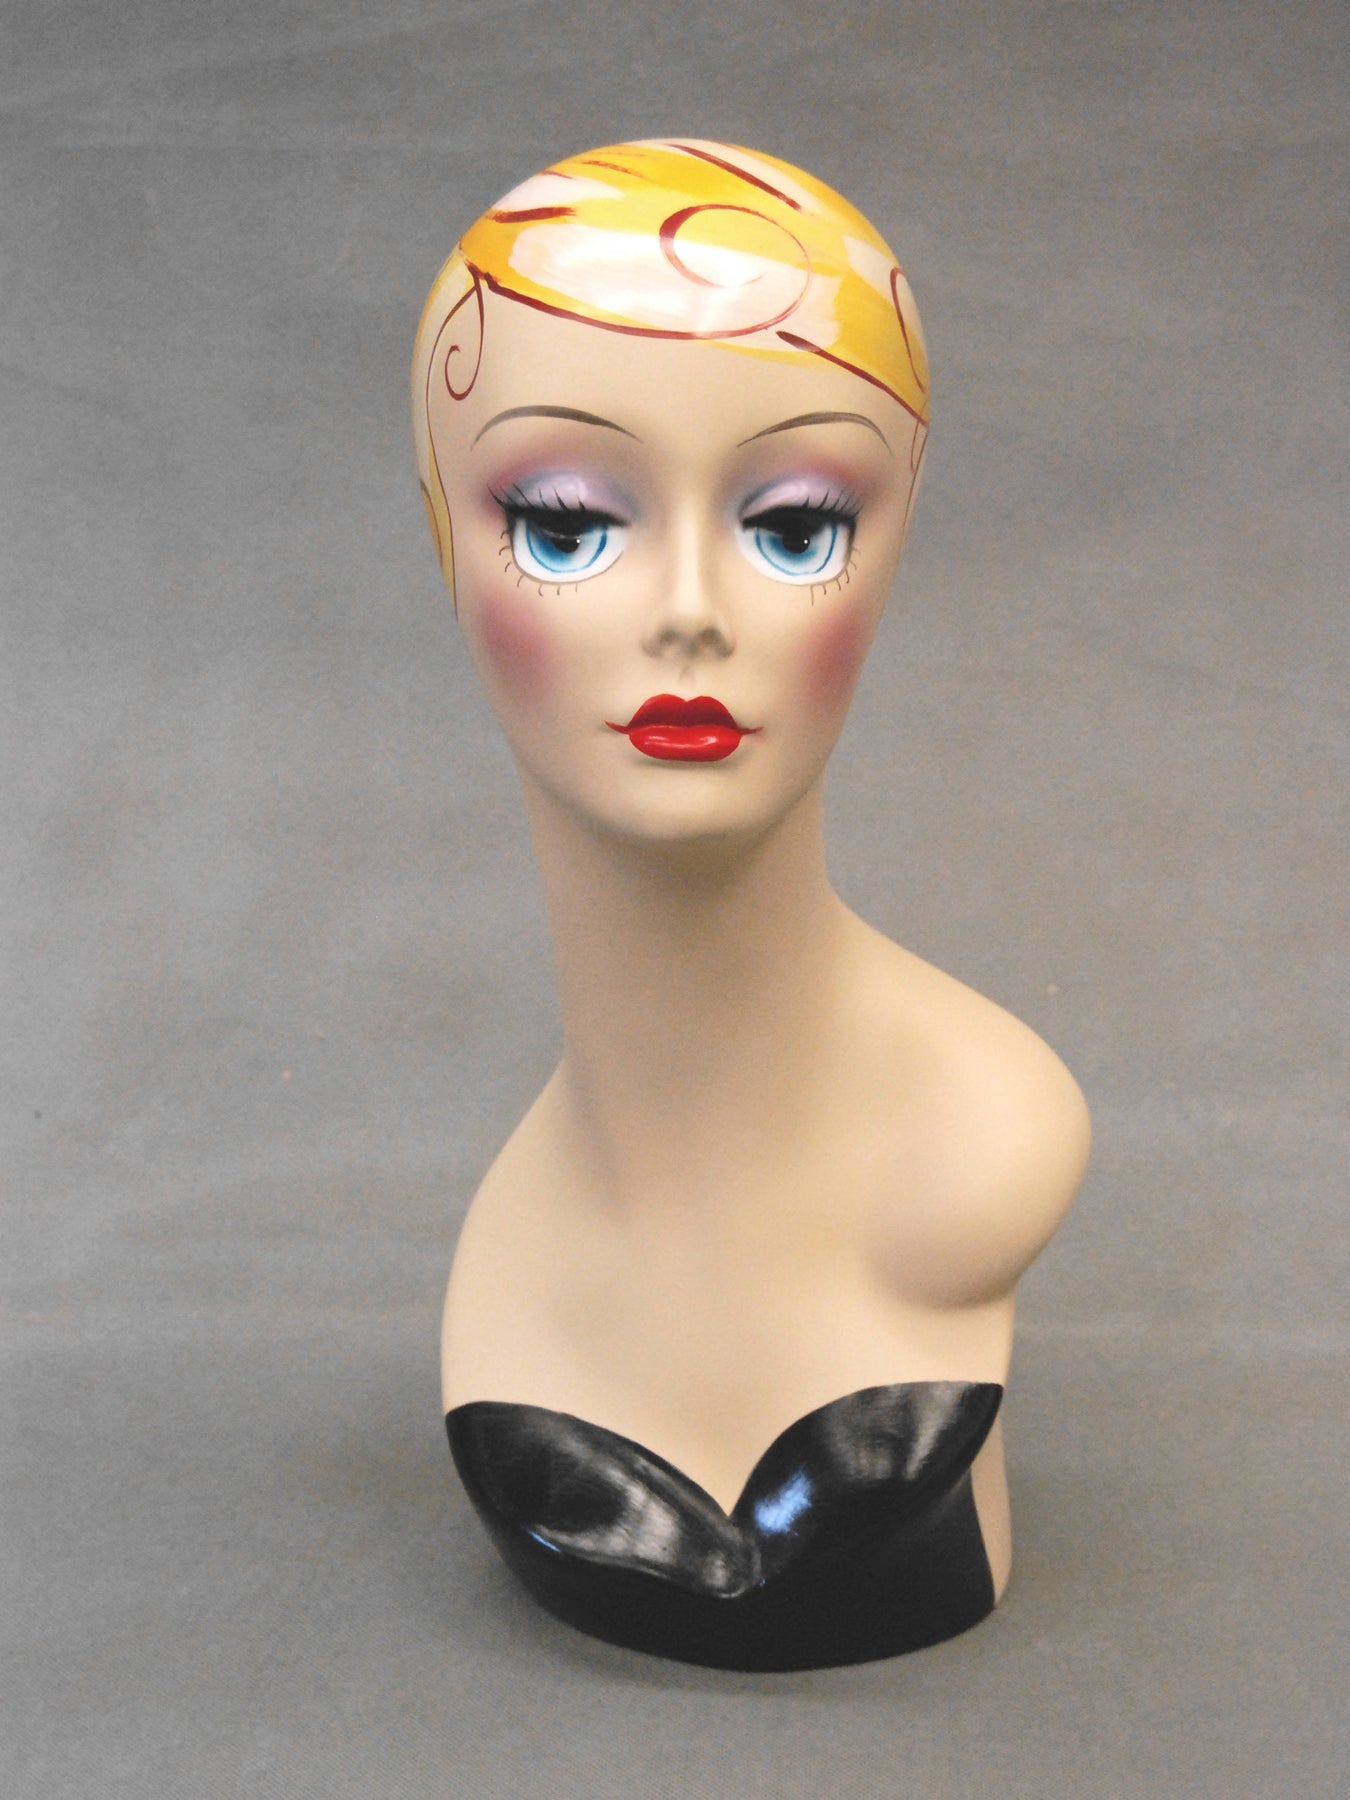 Vintage-style Mannequin Head: Micki 1 – Mannequin Madness